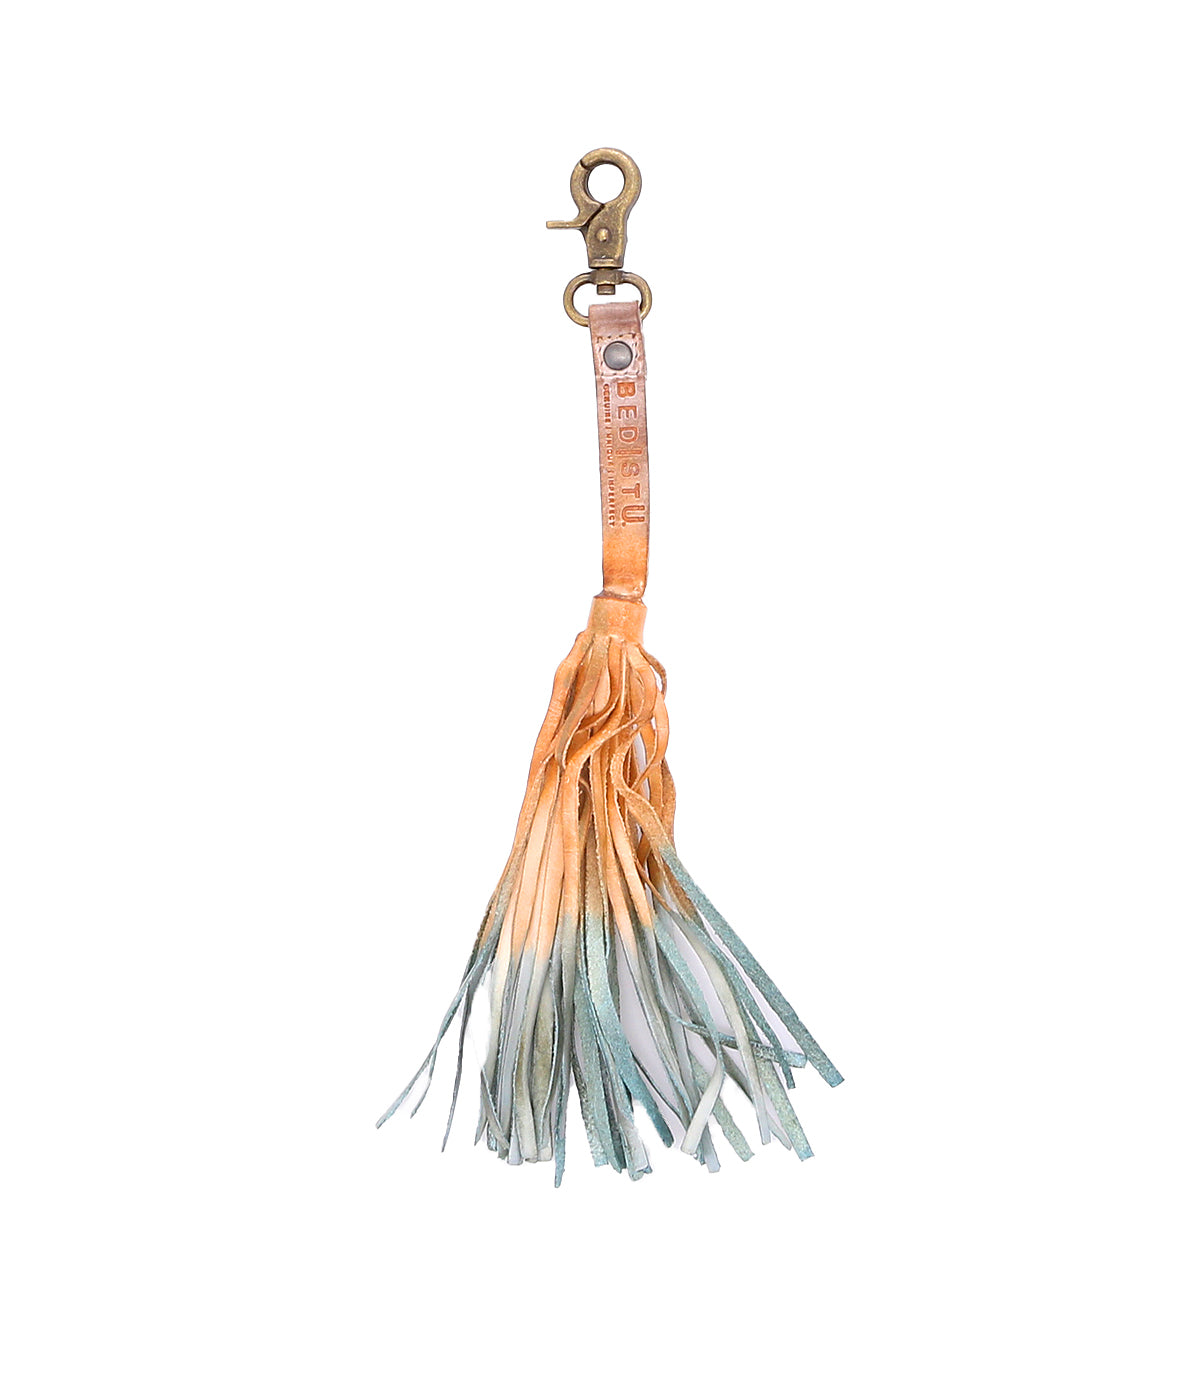 An accessory that serves as both a Bed Stu Tassel Clip and a personal expression piece, featuring an eye-catching orange and blue tassel.